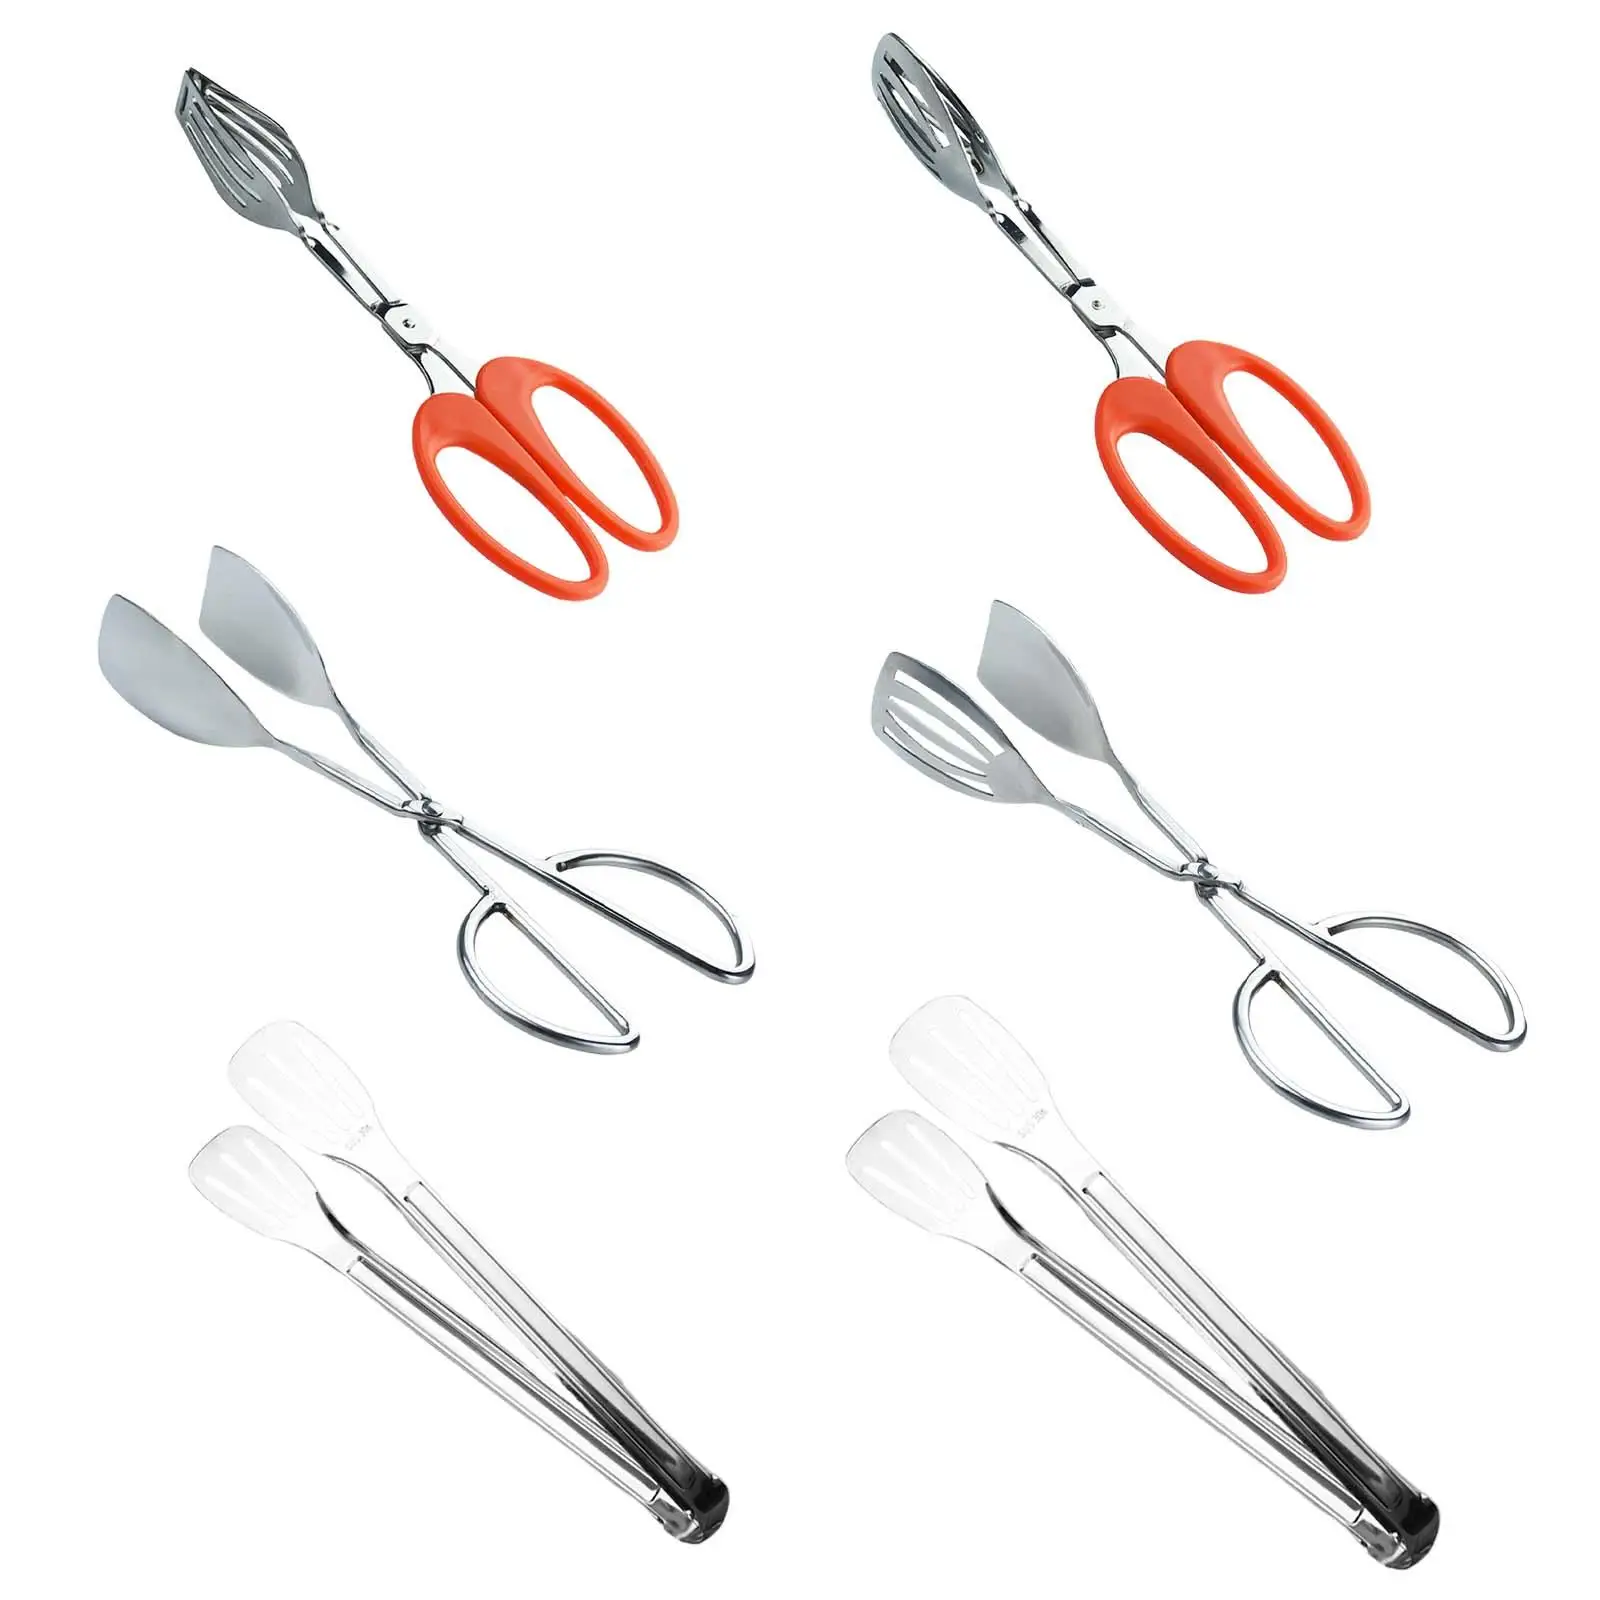 Kitchen Tongs Buffet Party Catering Serving Tongs Steak Clamps Household Cooking Tongs for Baking BBQ Grilling Barbecue Frying